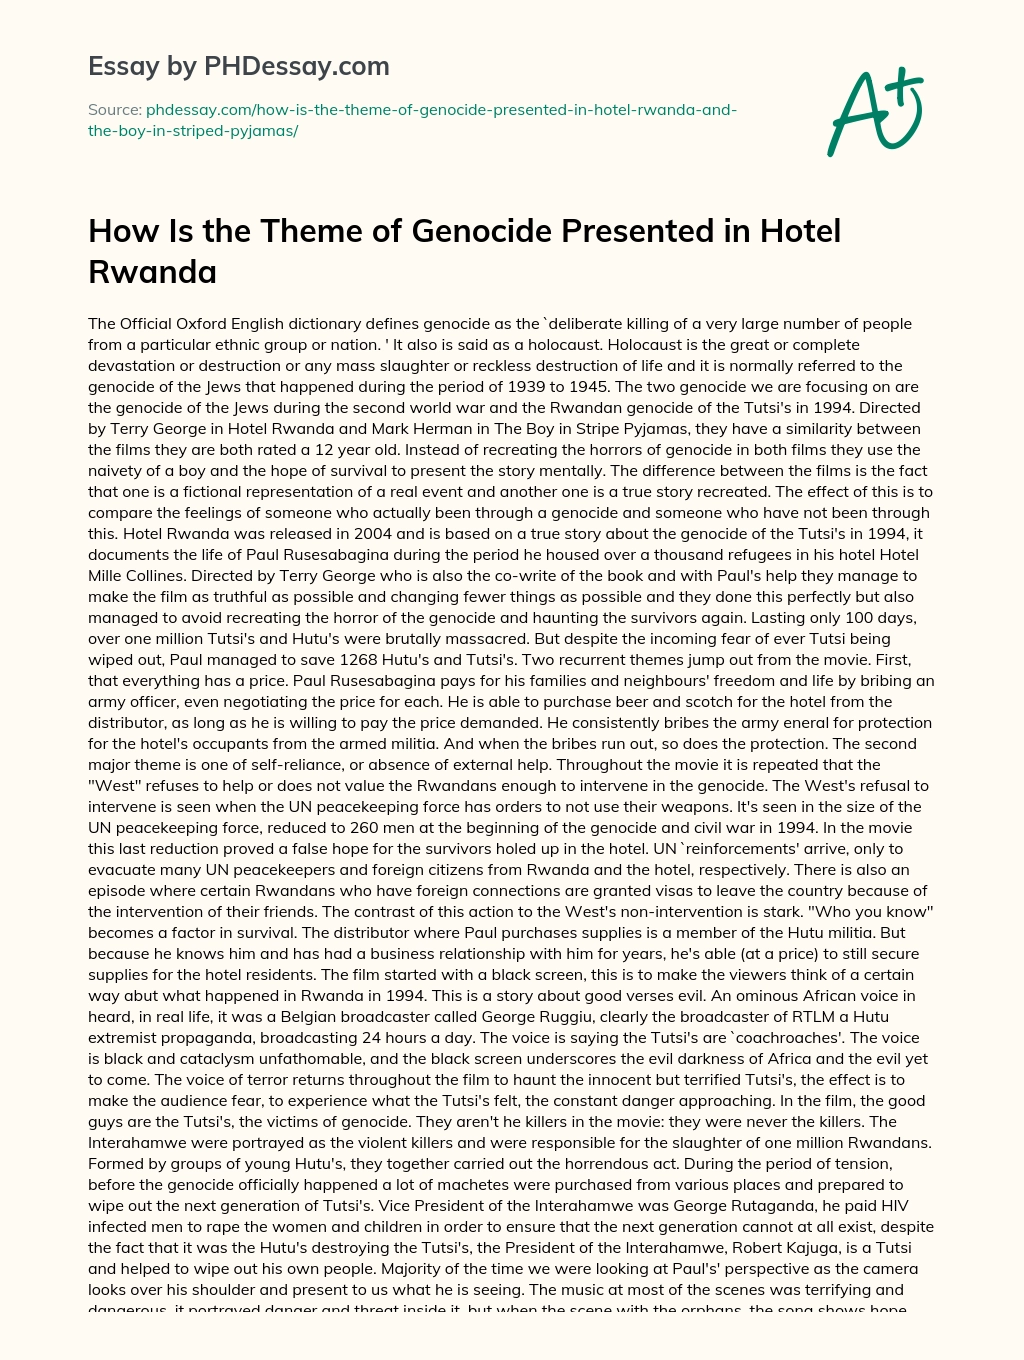 How Is the Theme of Genocide Presented in Hotel Rwanda essay